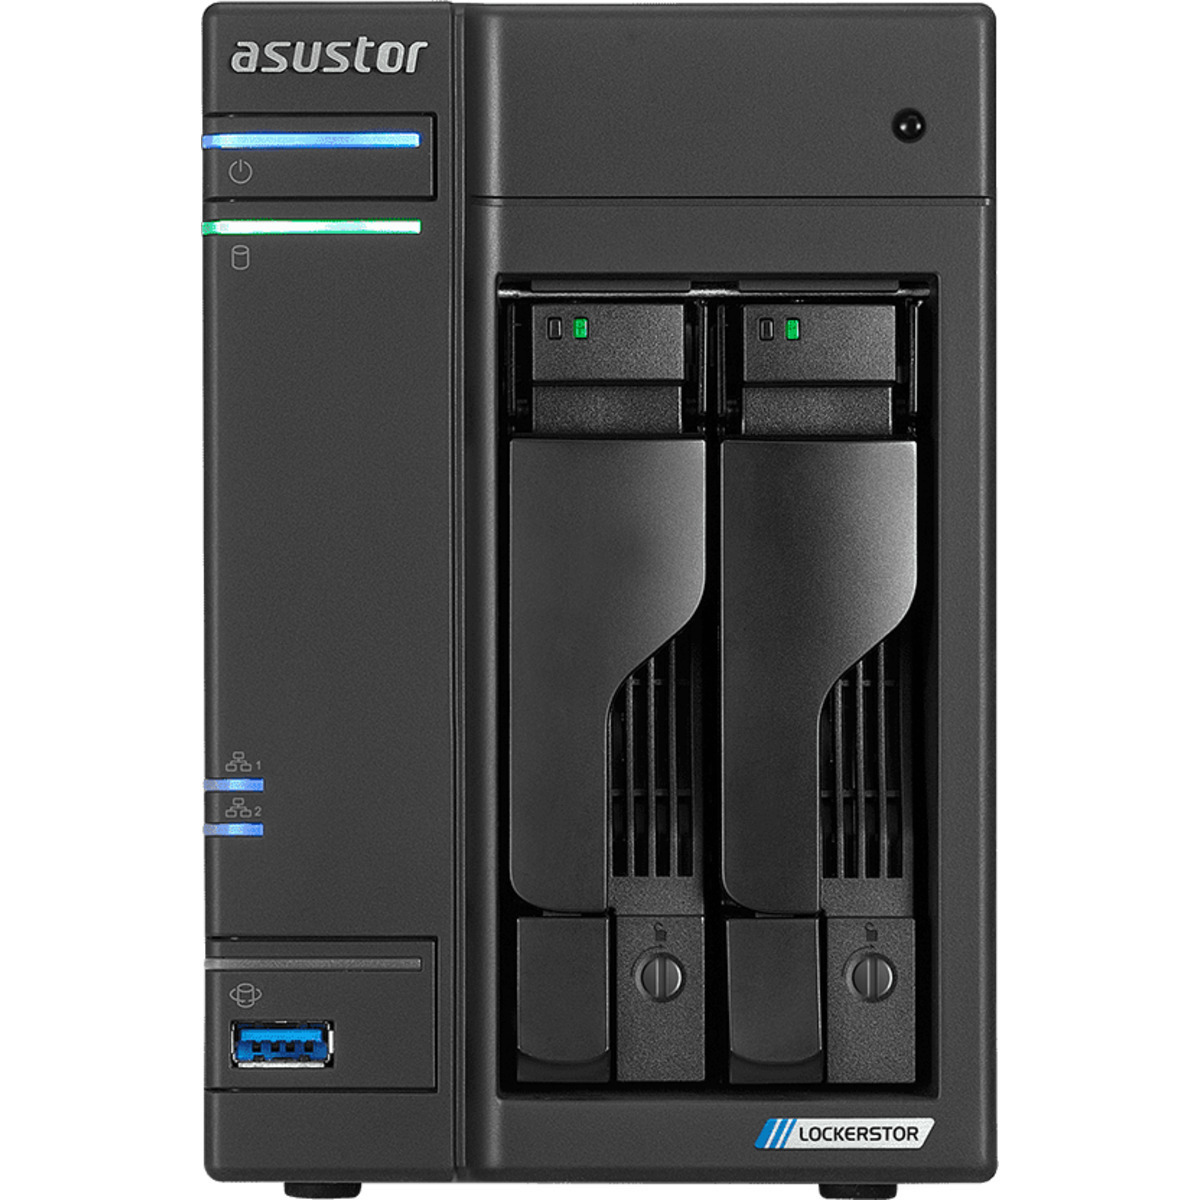 ASUSTOR AS6602T Lockerstor 2 24tb 2-Bay Desktop Multimedia / Power User / Business NAS - Network Attached Storage Device 1x24tb Western Digital Ultrastar HC580 WUH722424ALE6L4 3.5 7200rpm SATA 6Gb/s HDD ENTERPRISE Class Drives Installed - Burn-In Tested - FREE RAM UPGRADE AS6602T Lockerstor 2